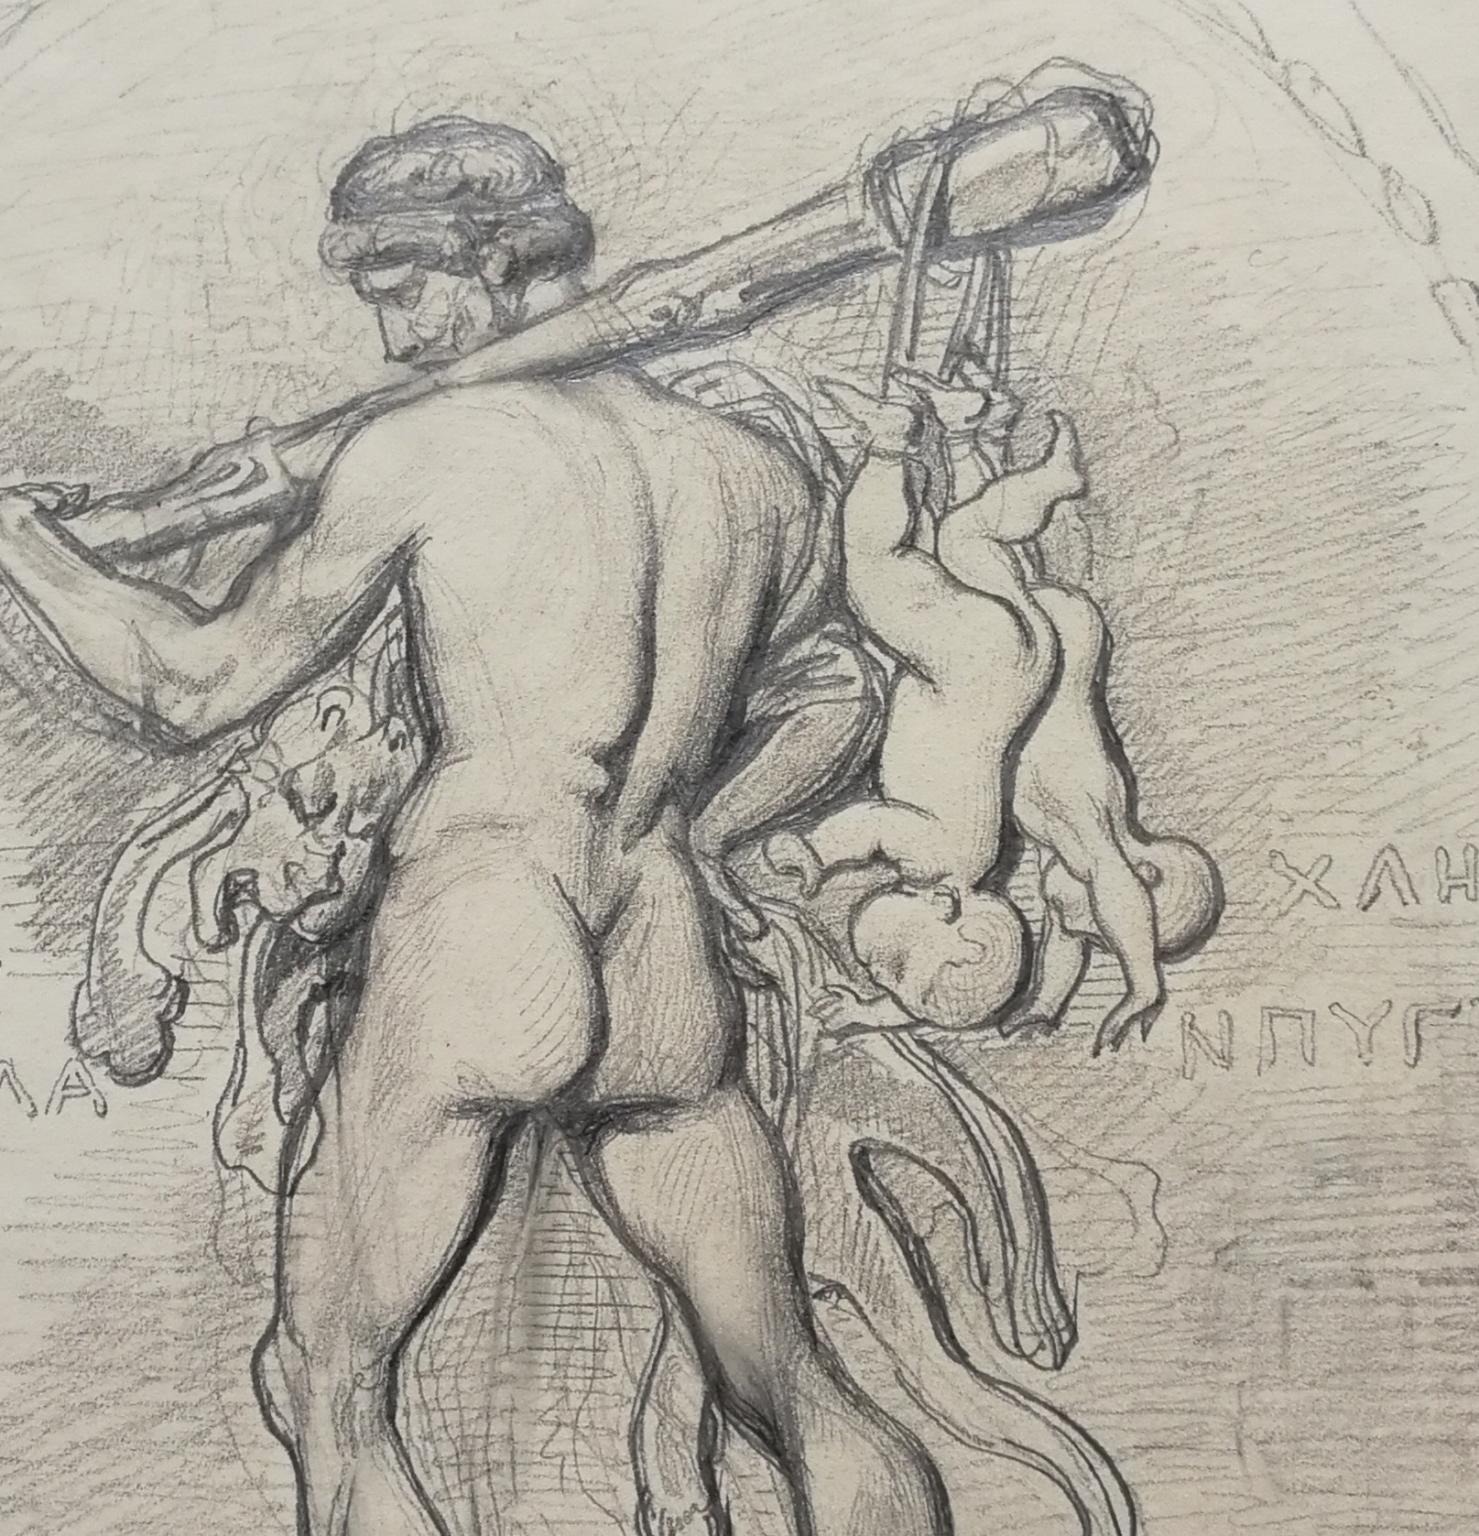 French Neoclassic mythological figurative drawing early 18th century